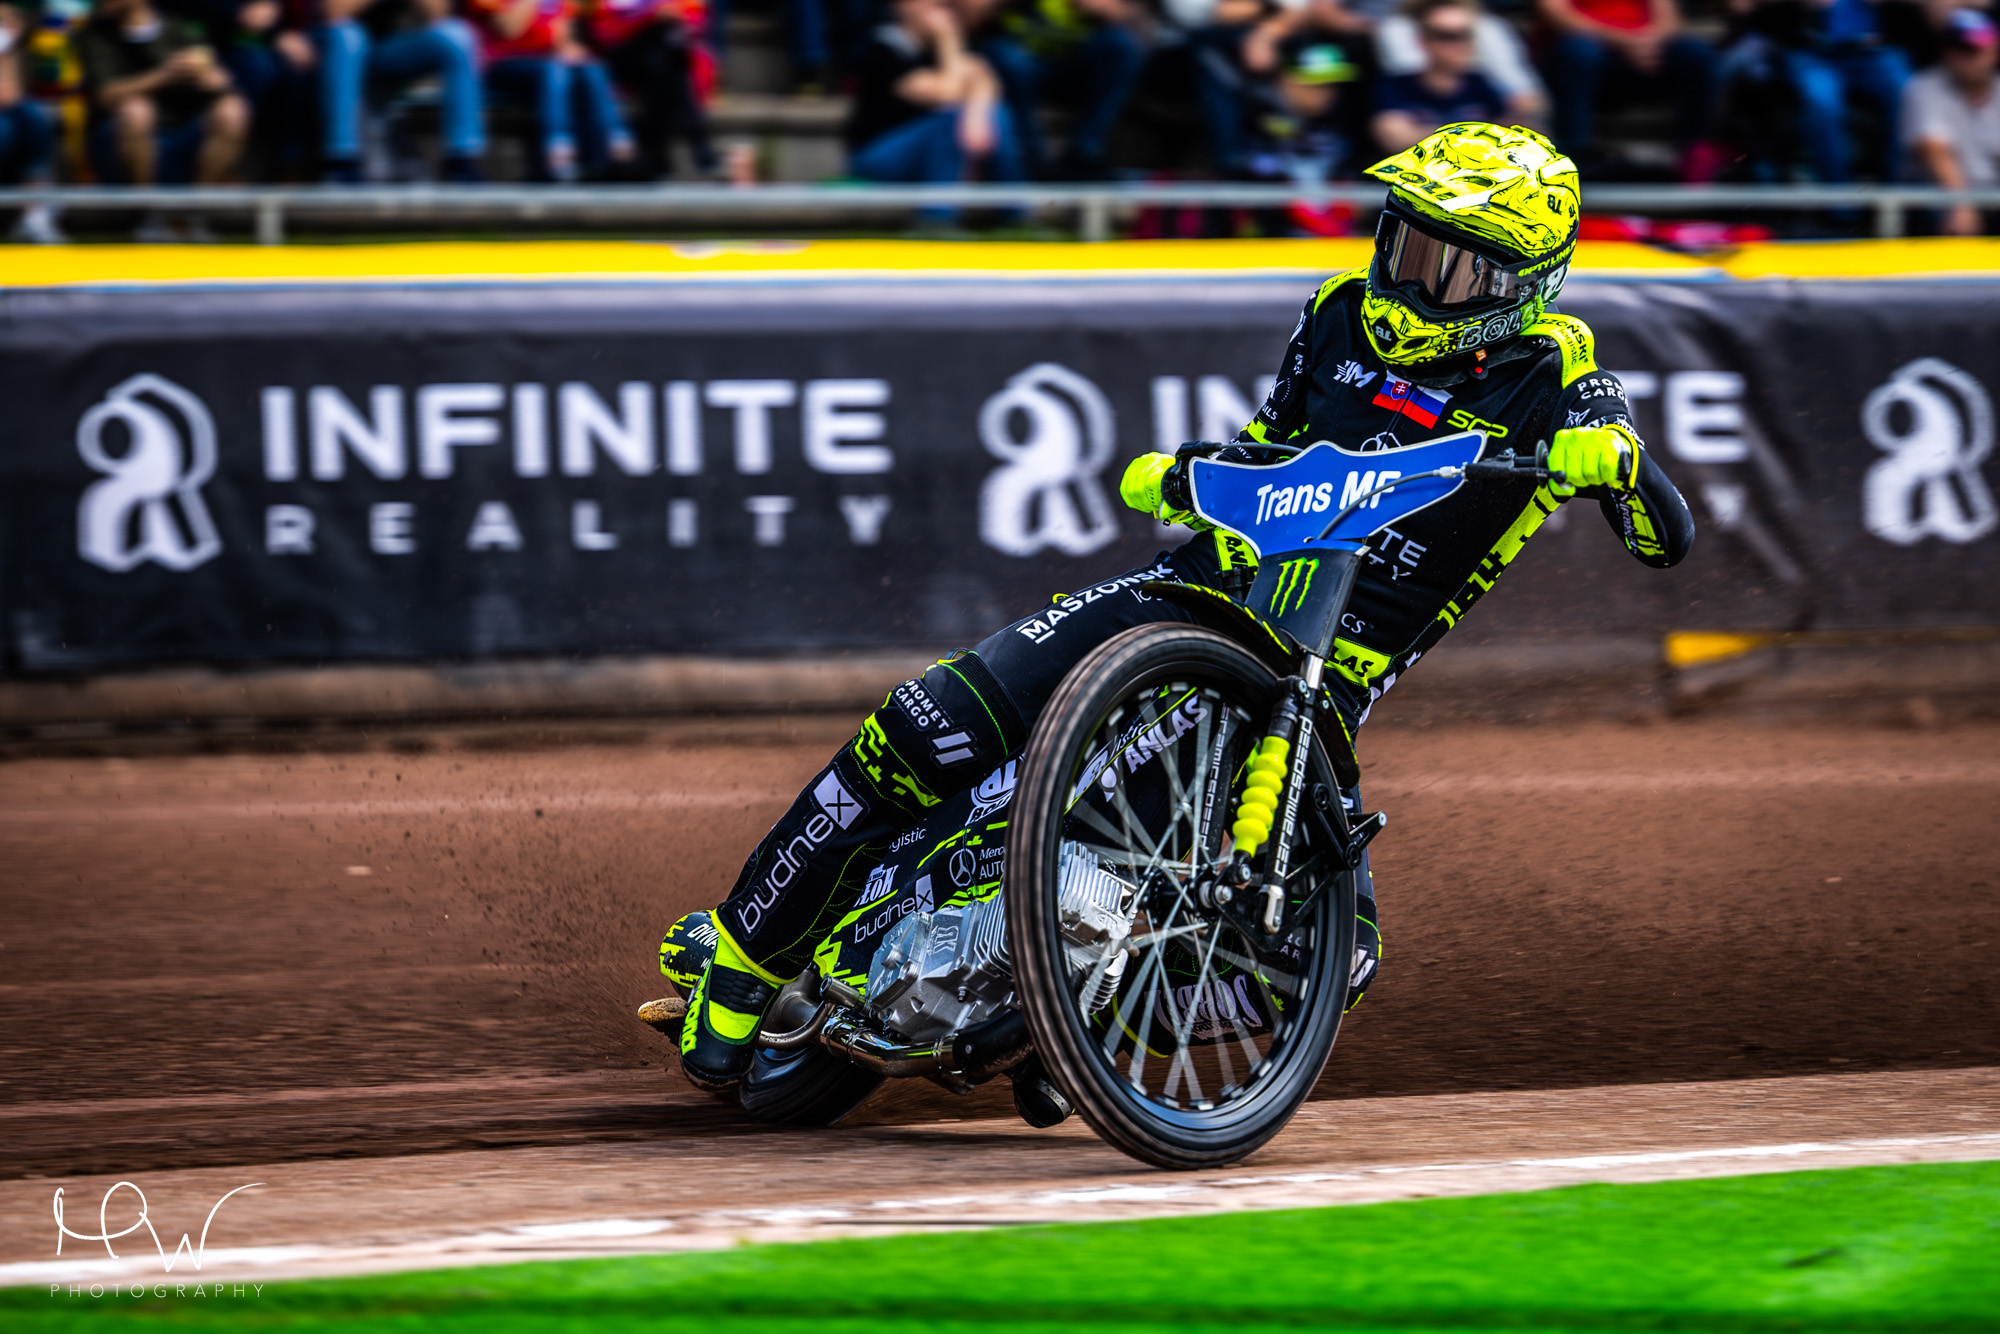 Eleventh place of Martin Vaculik in Malilli